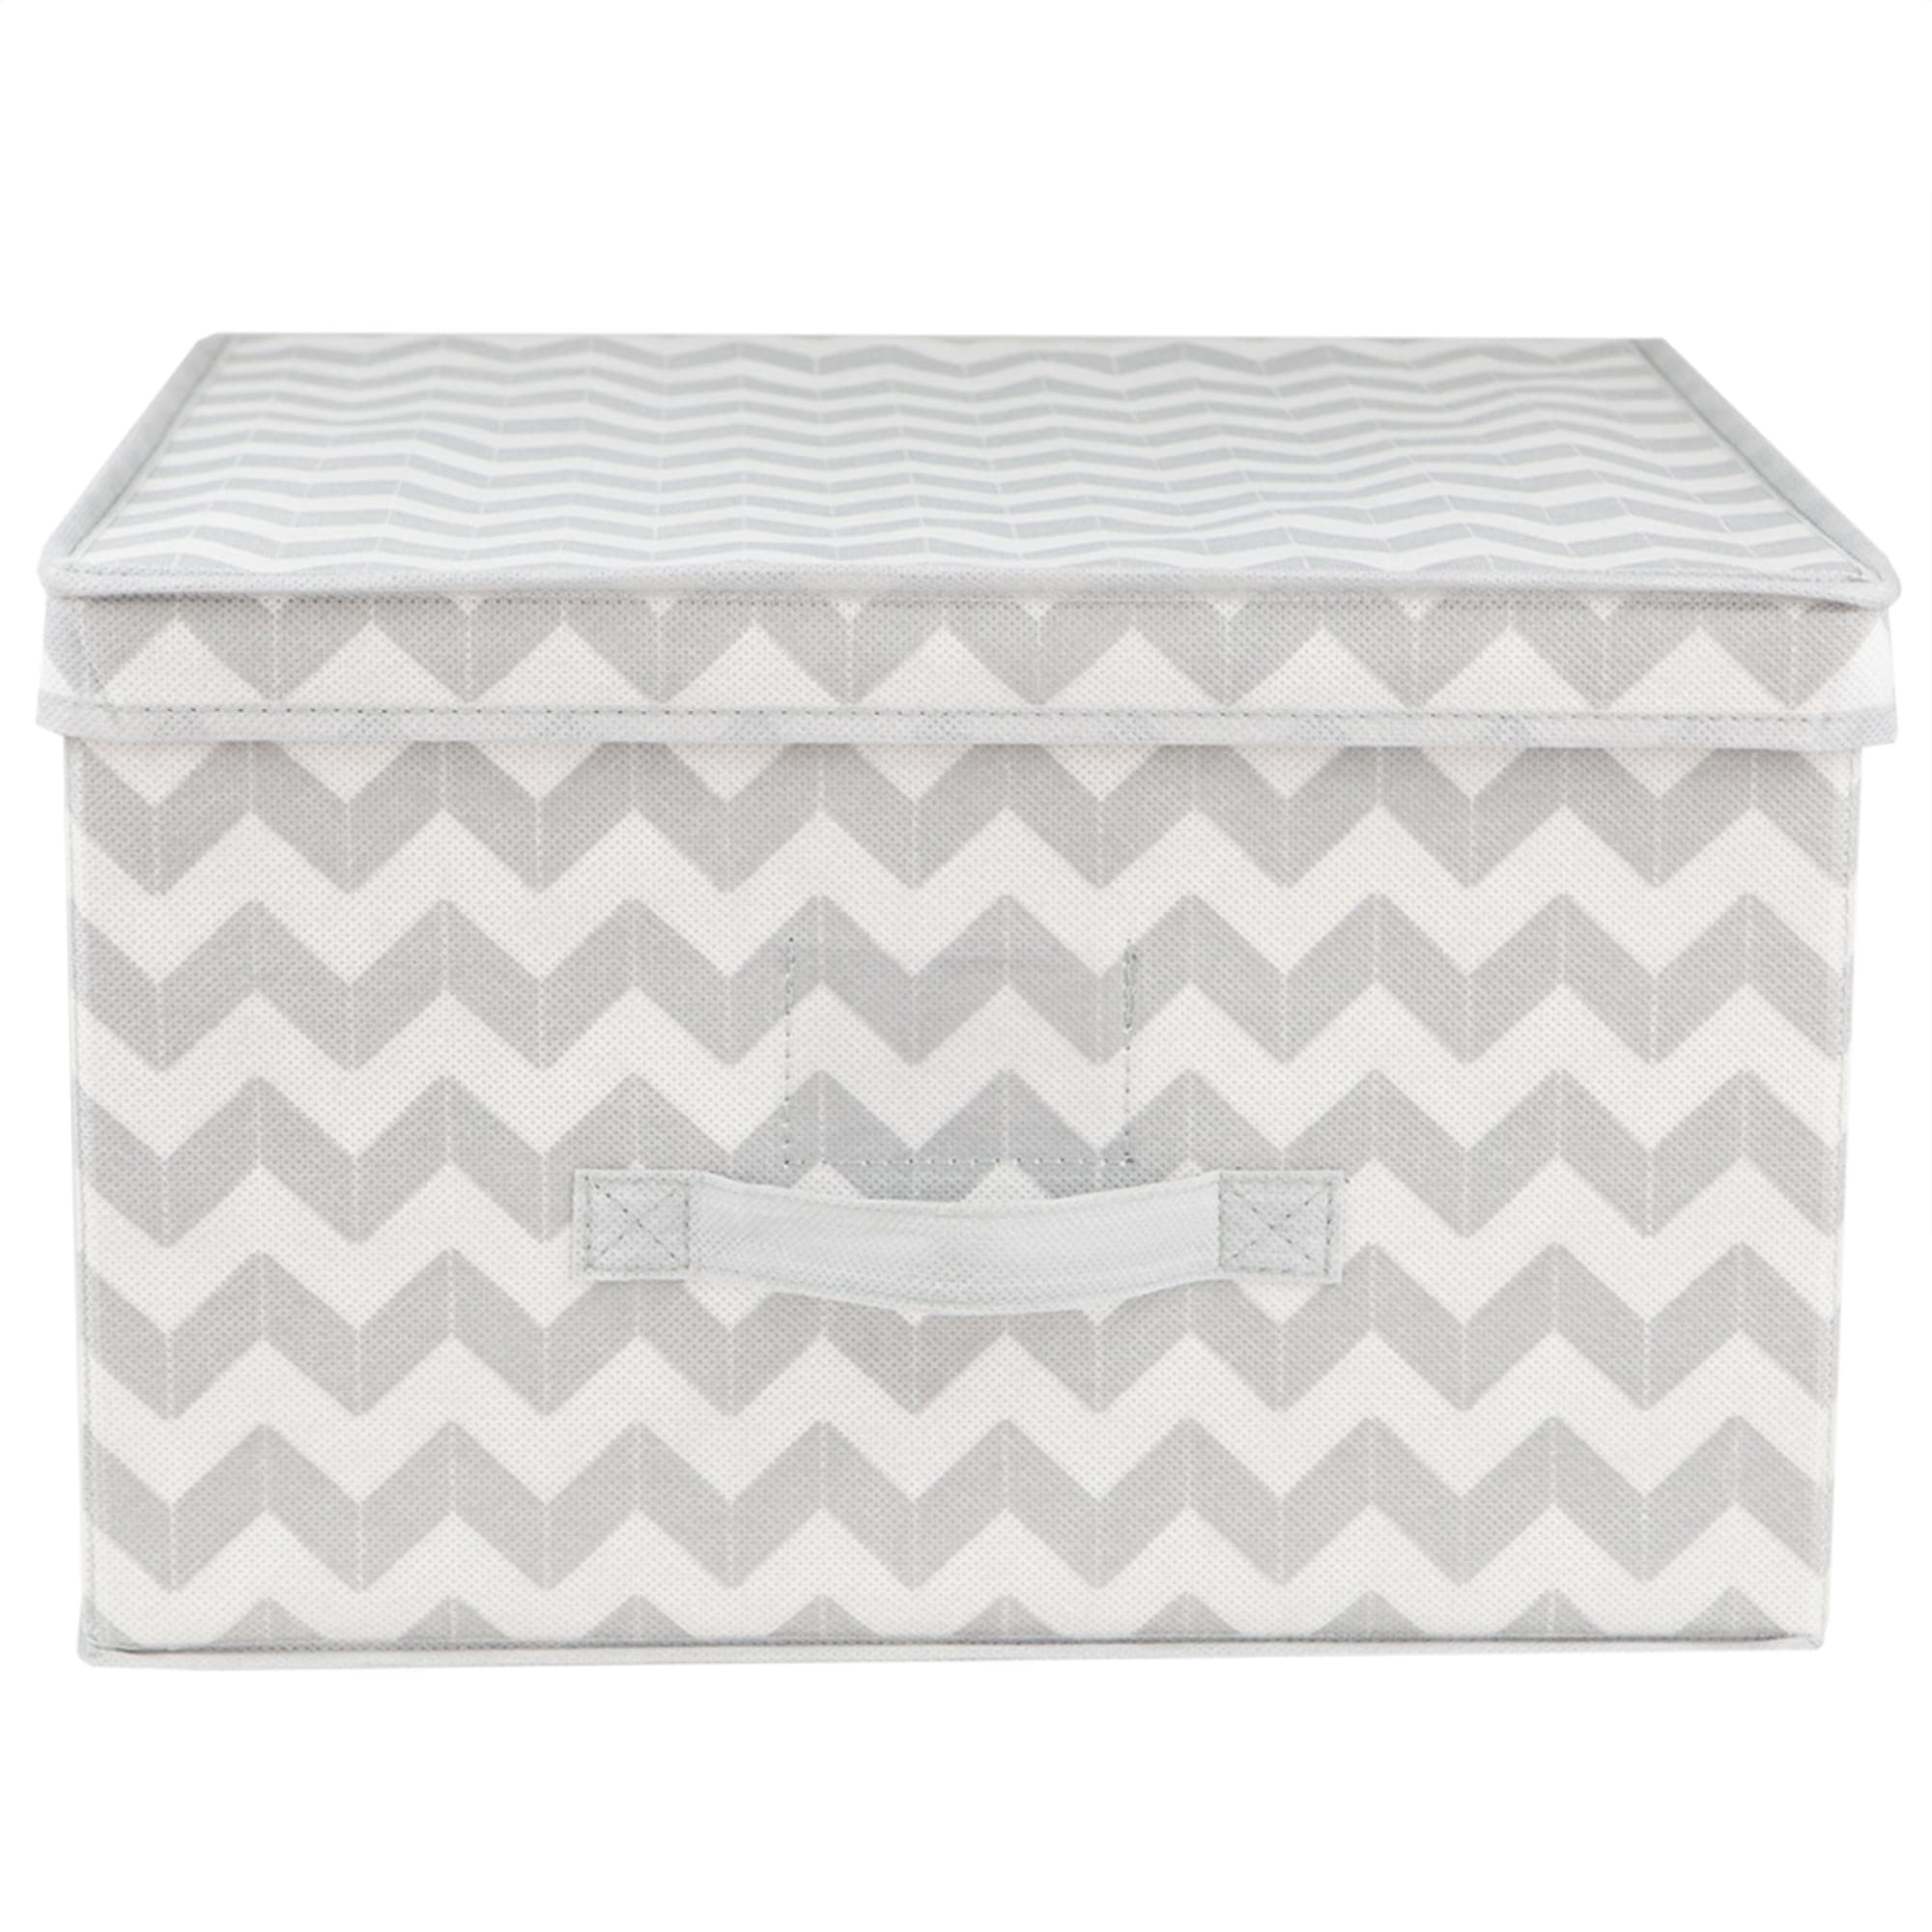 Home Basics Chevron Non-Woven Collapsible Multi-Purpose Jumbo Storage Box with Clear Window, Grey $6.00 EACH, CASE PACK OF 12